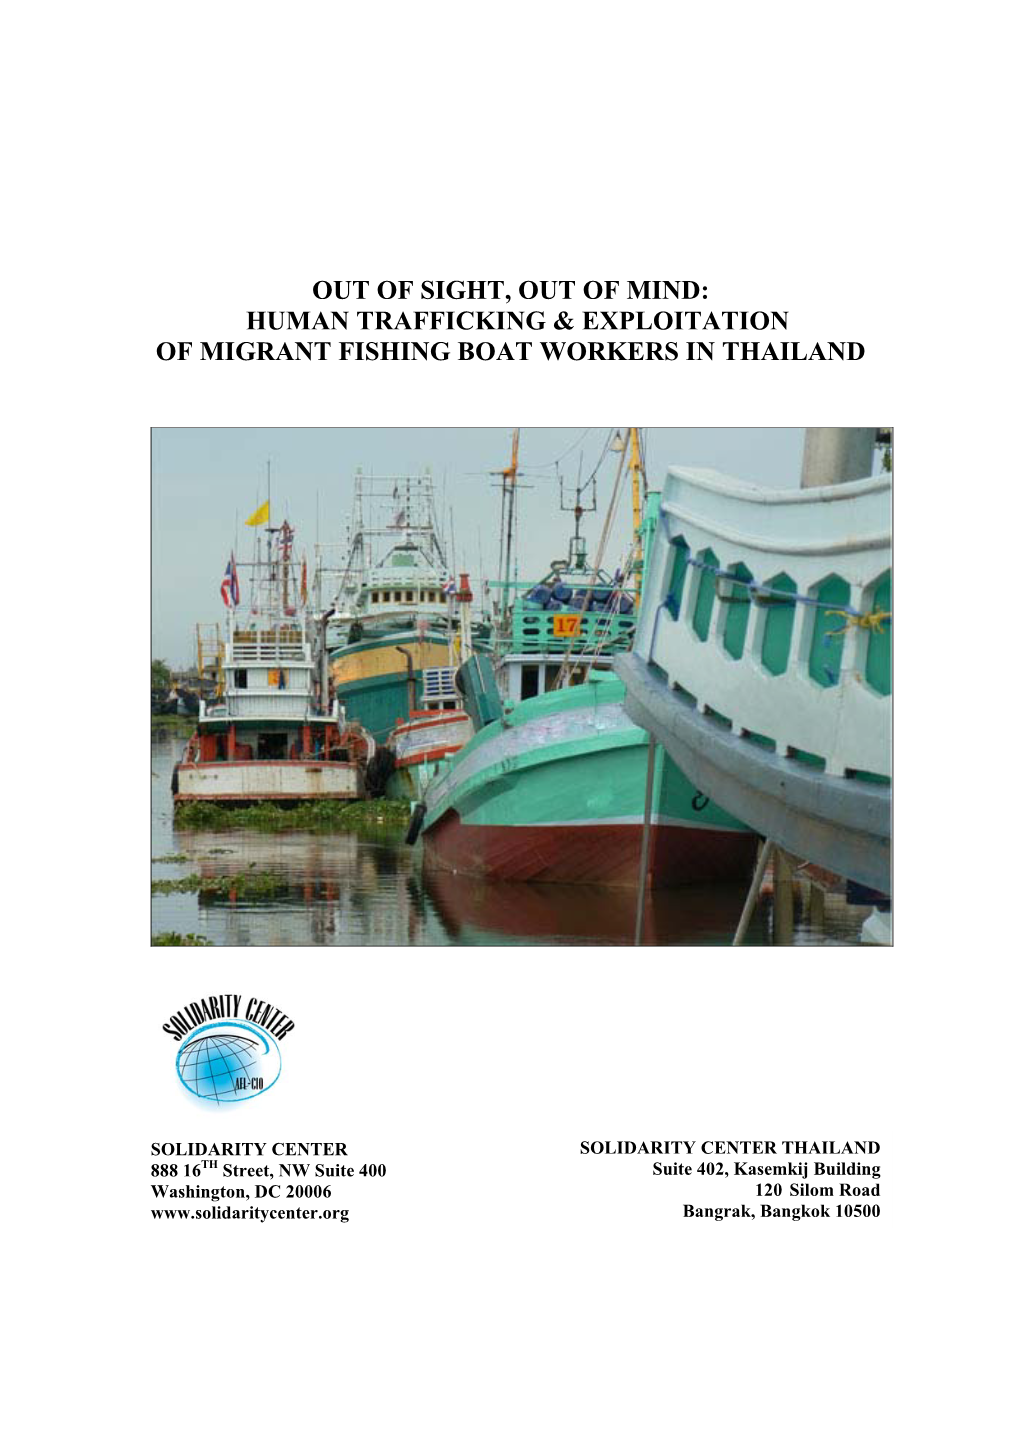 Out of Sight, out of Mind: Human Trafficking & Exploitation of Migrant Fishing Boat Workers in Thailand